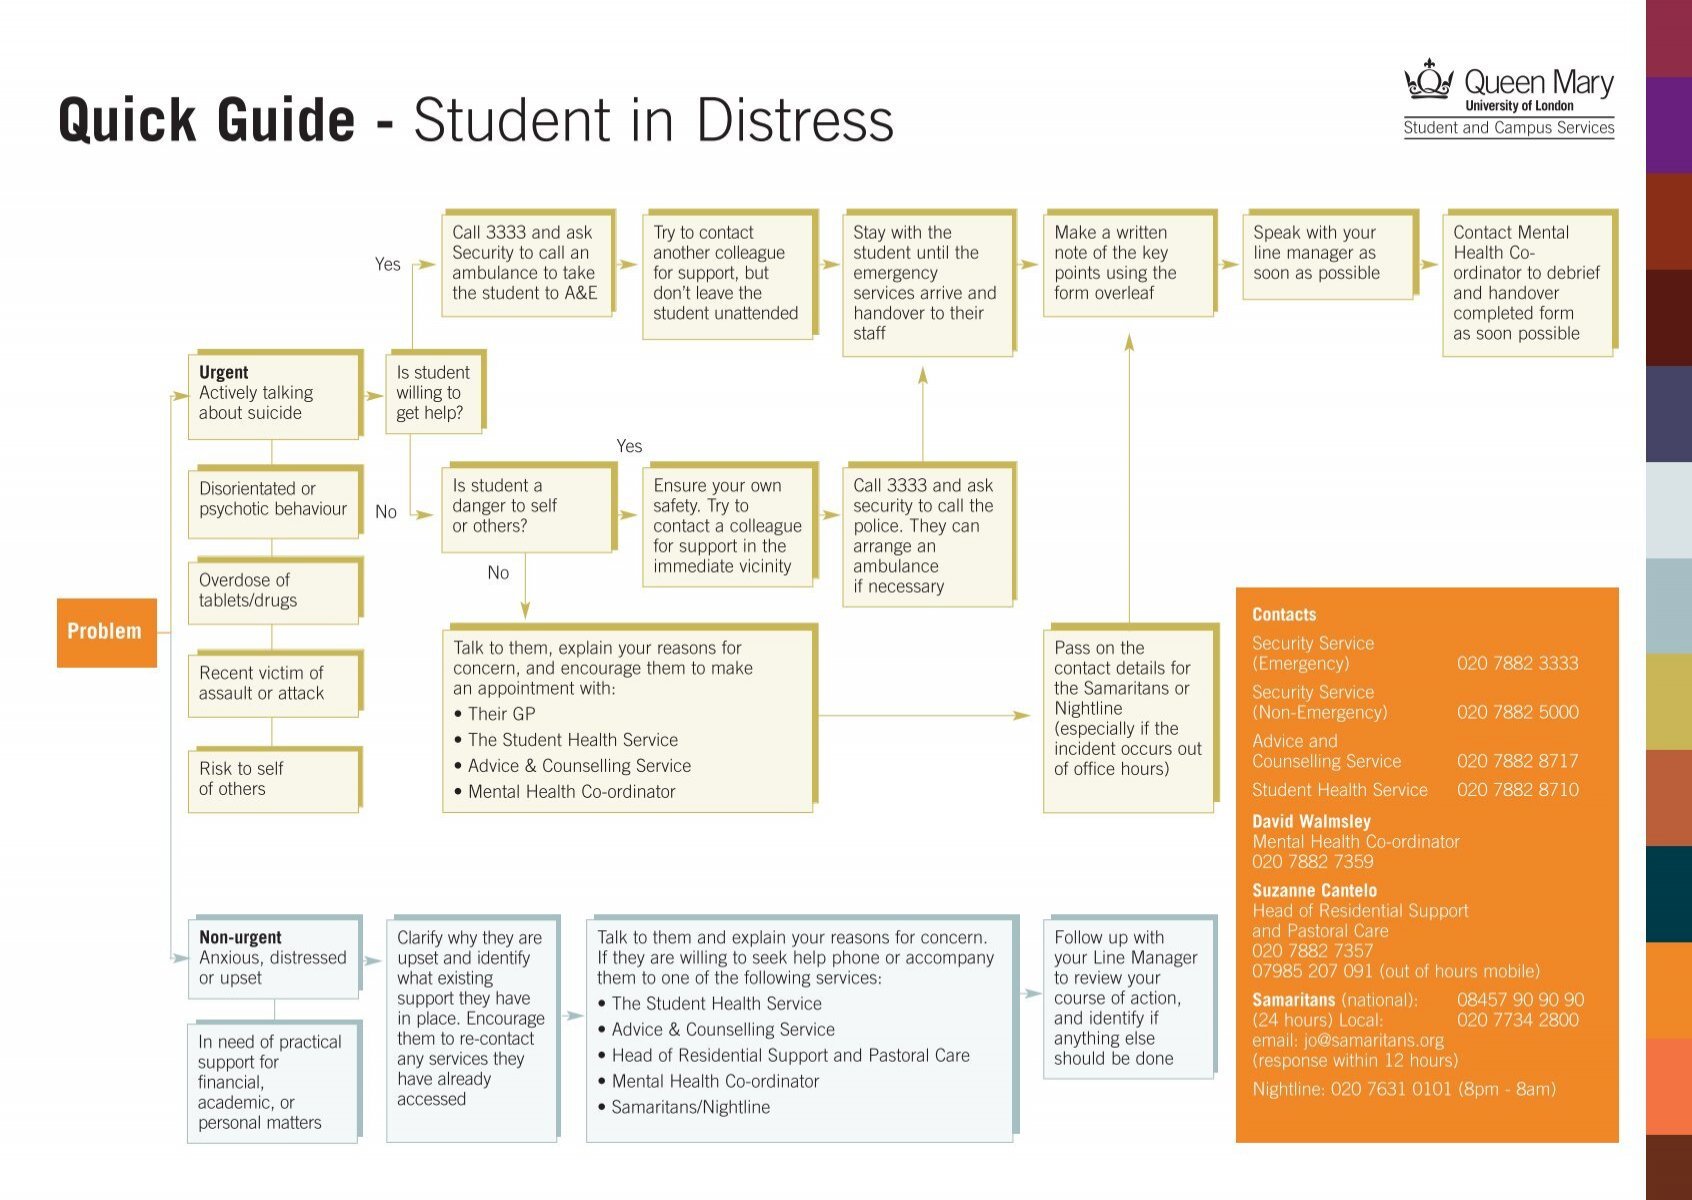 What to Do When a Colleague is in Distress? A Guide for Non